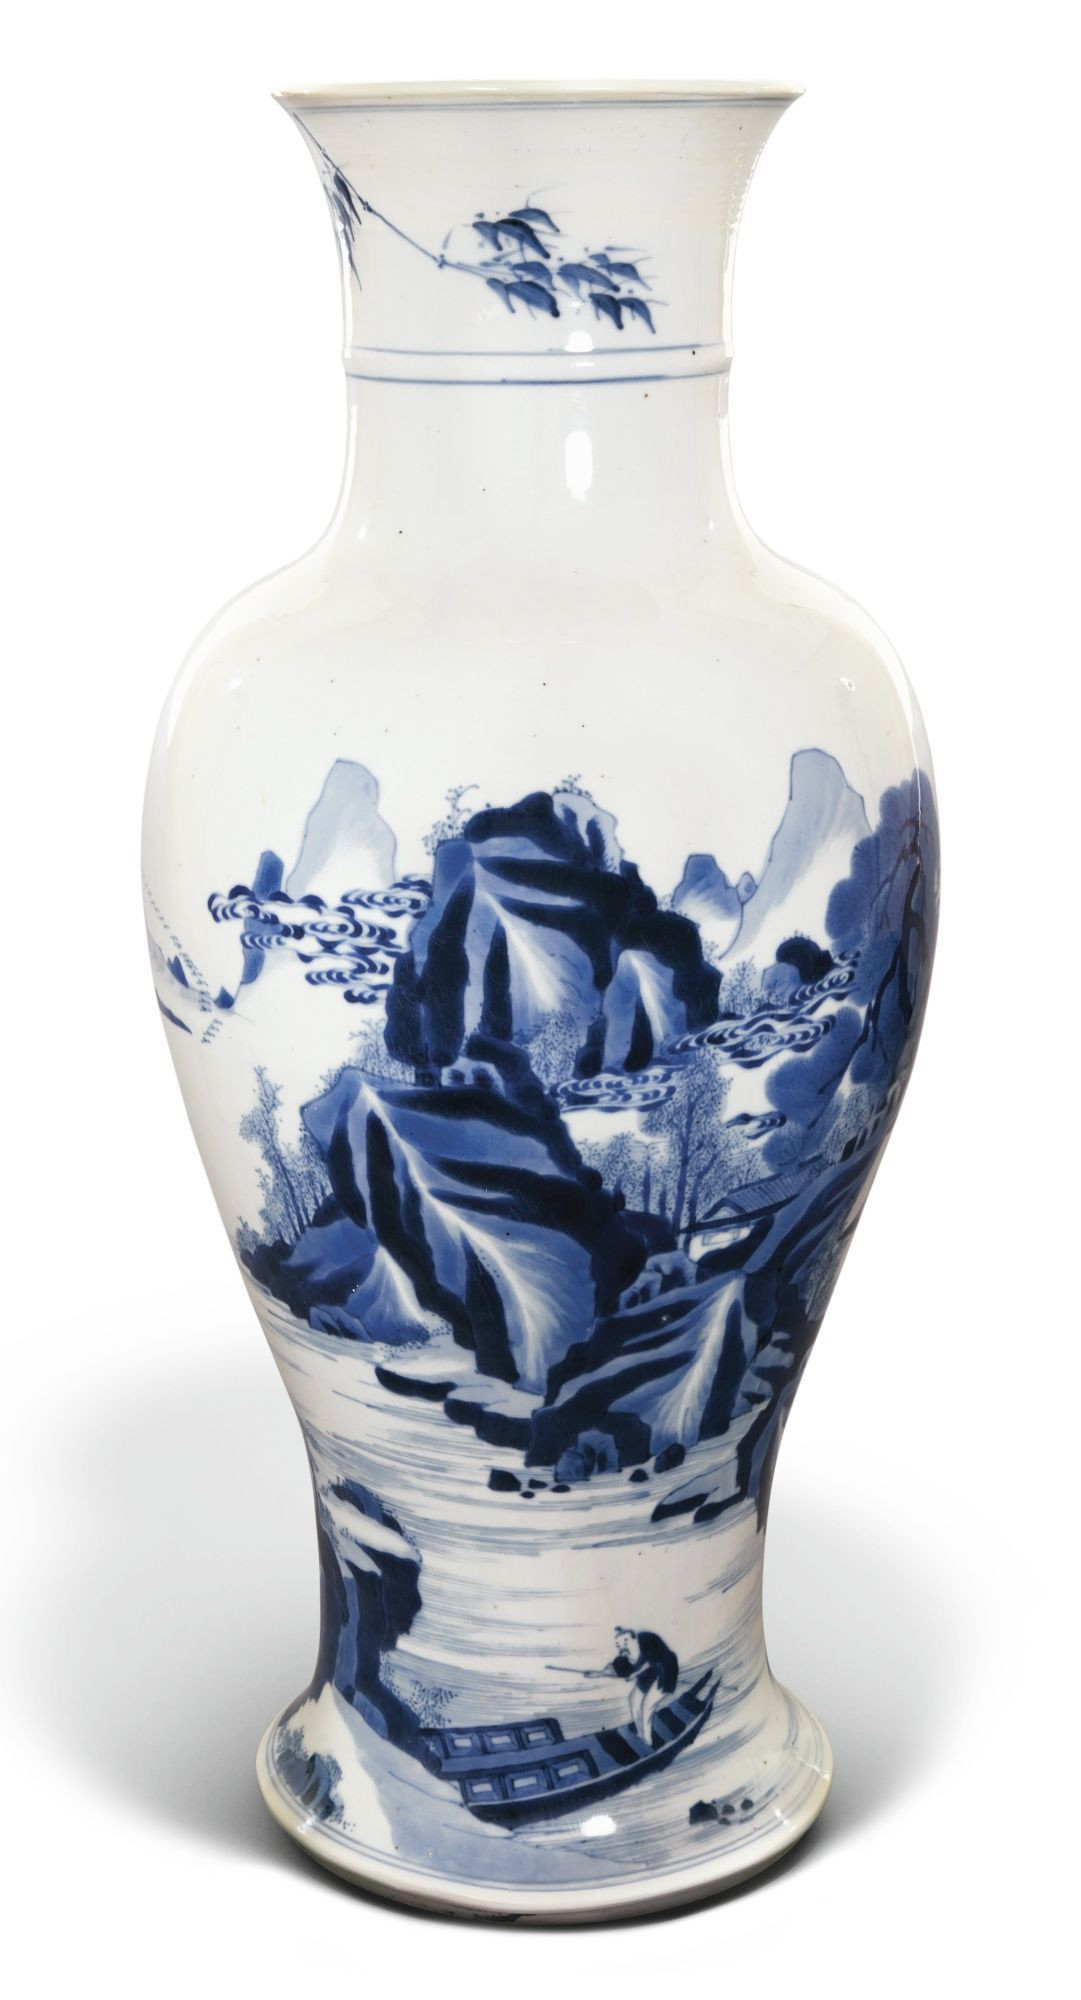 18 Lovable 12 Inch Ceramic Vase 2024 free download 12 inch ceramic vase of 32 wide mouth vase the weekly world for a large blue and white baluster vase qing dynasty kangxi period